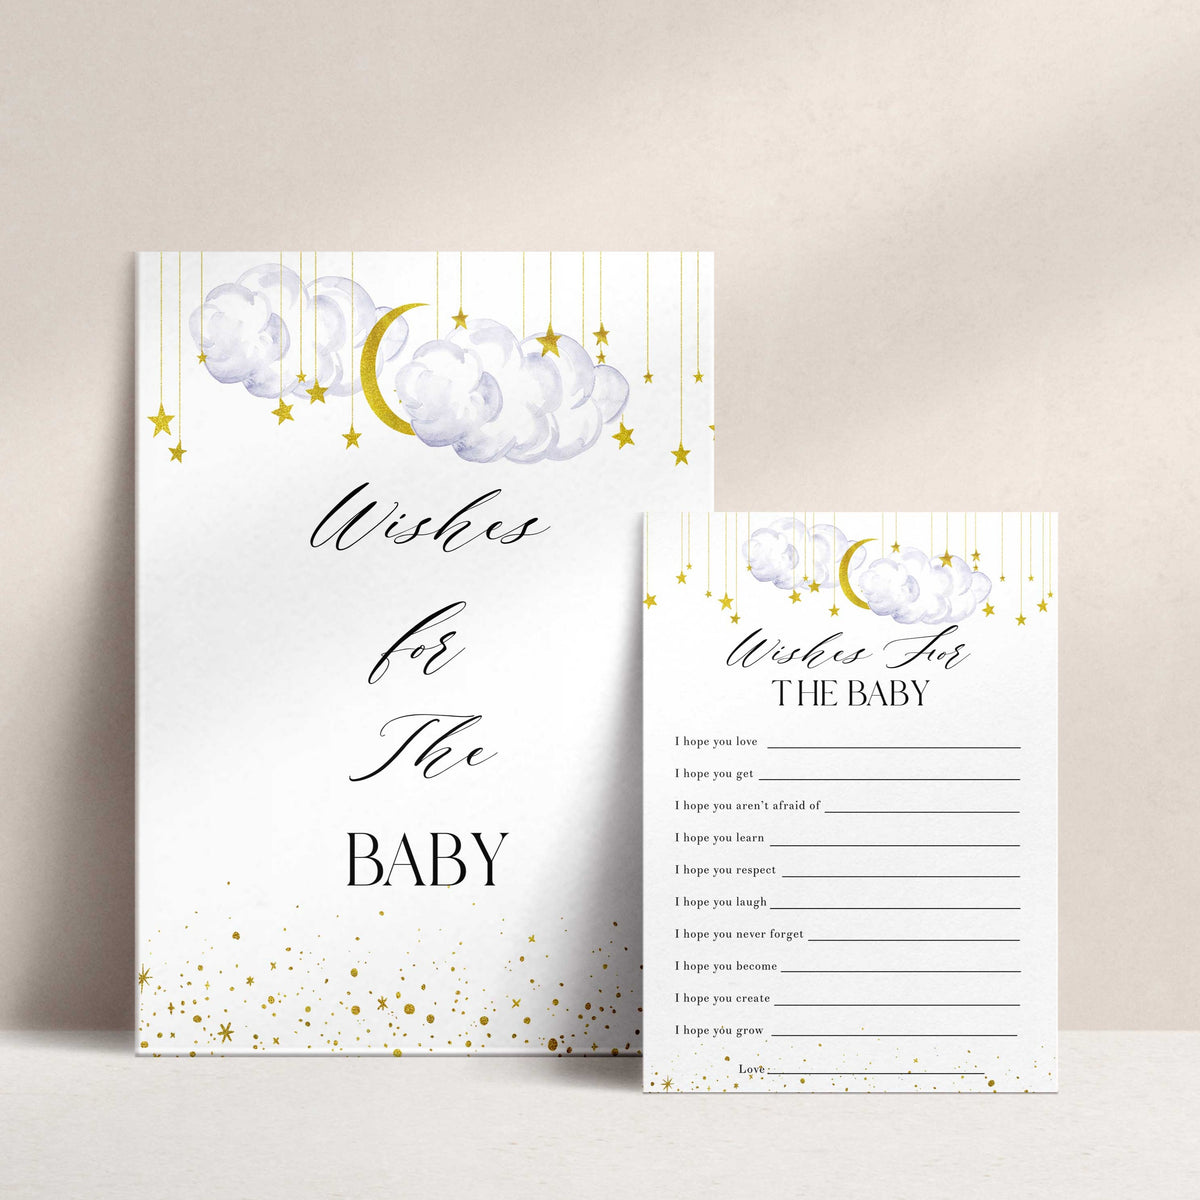 Fully editable and printable baby shower wishes for the baby game with a little star design. Perfect for a Twinkle Little Star baby shower themed party